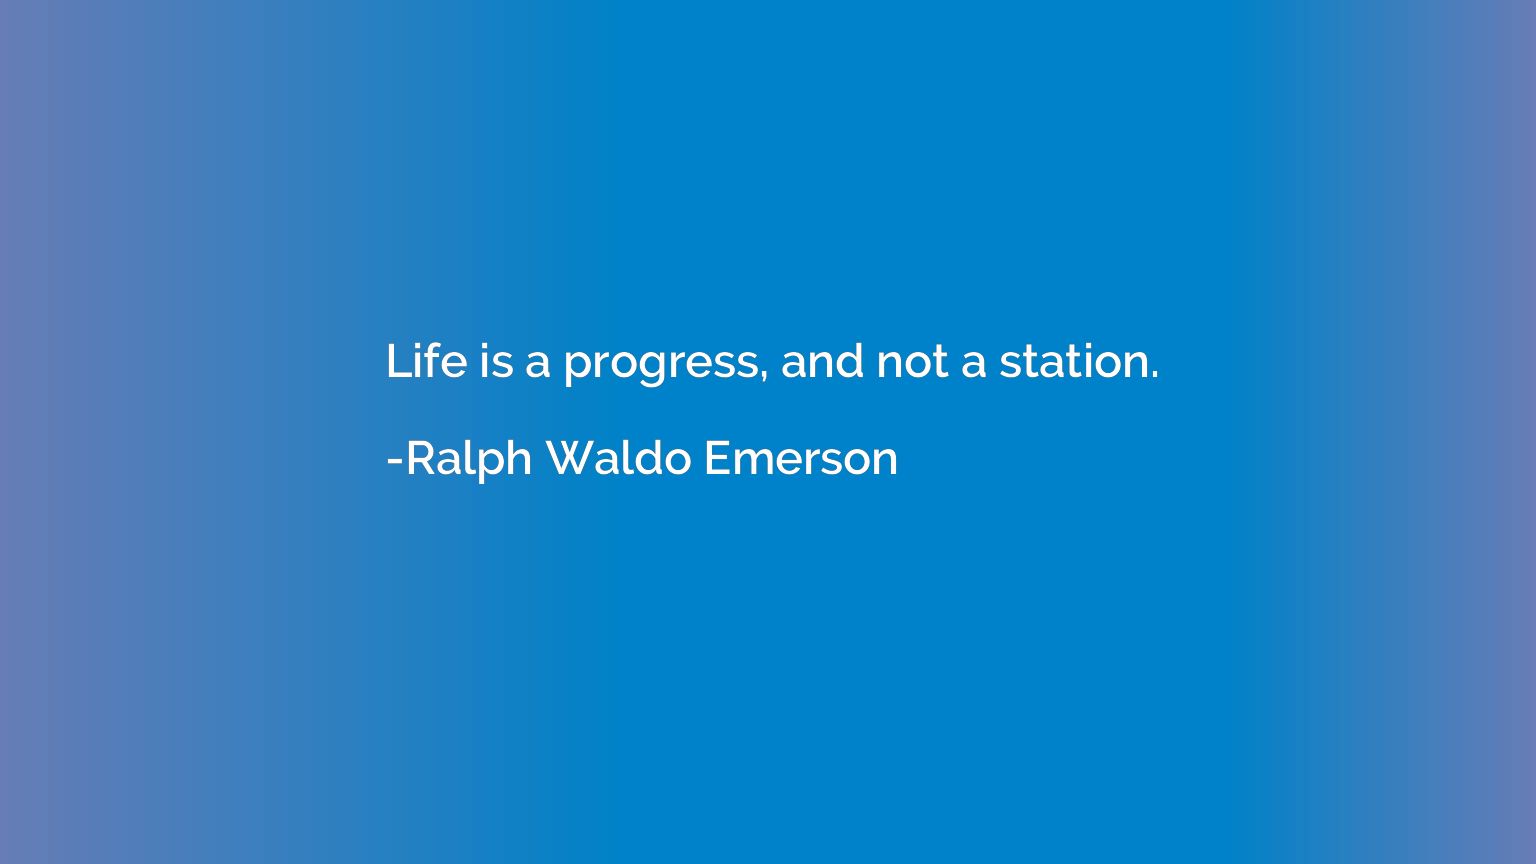 Life is a progress, and not a station.